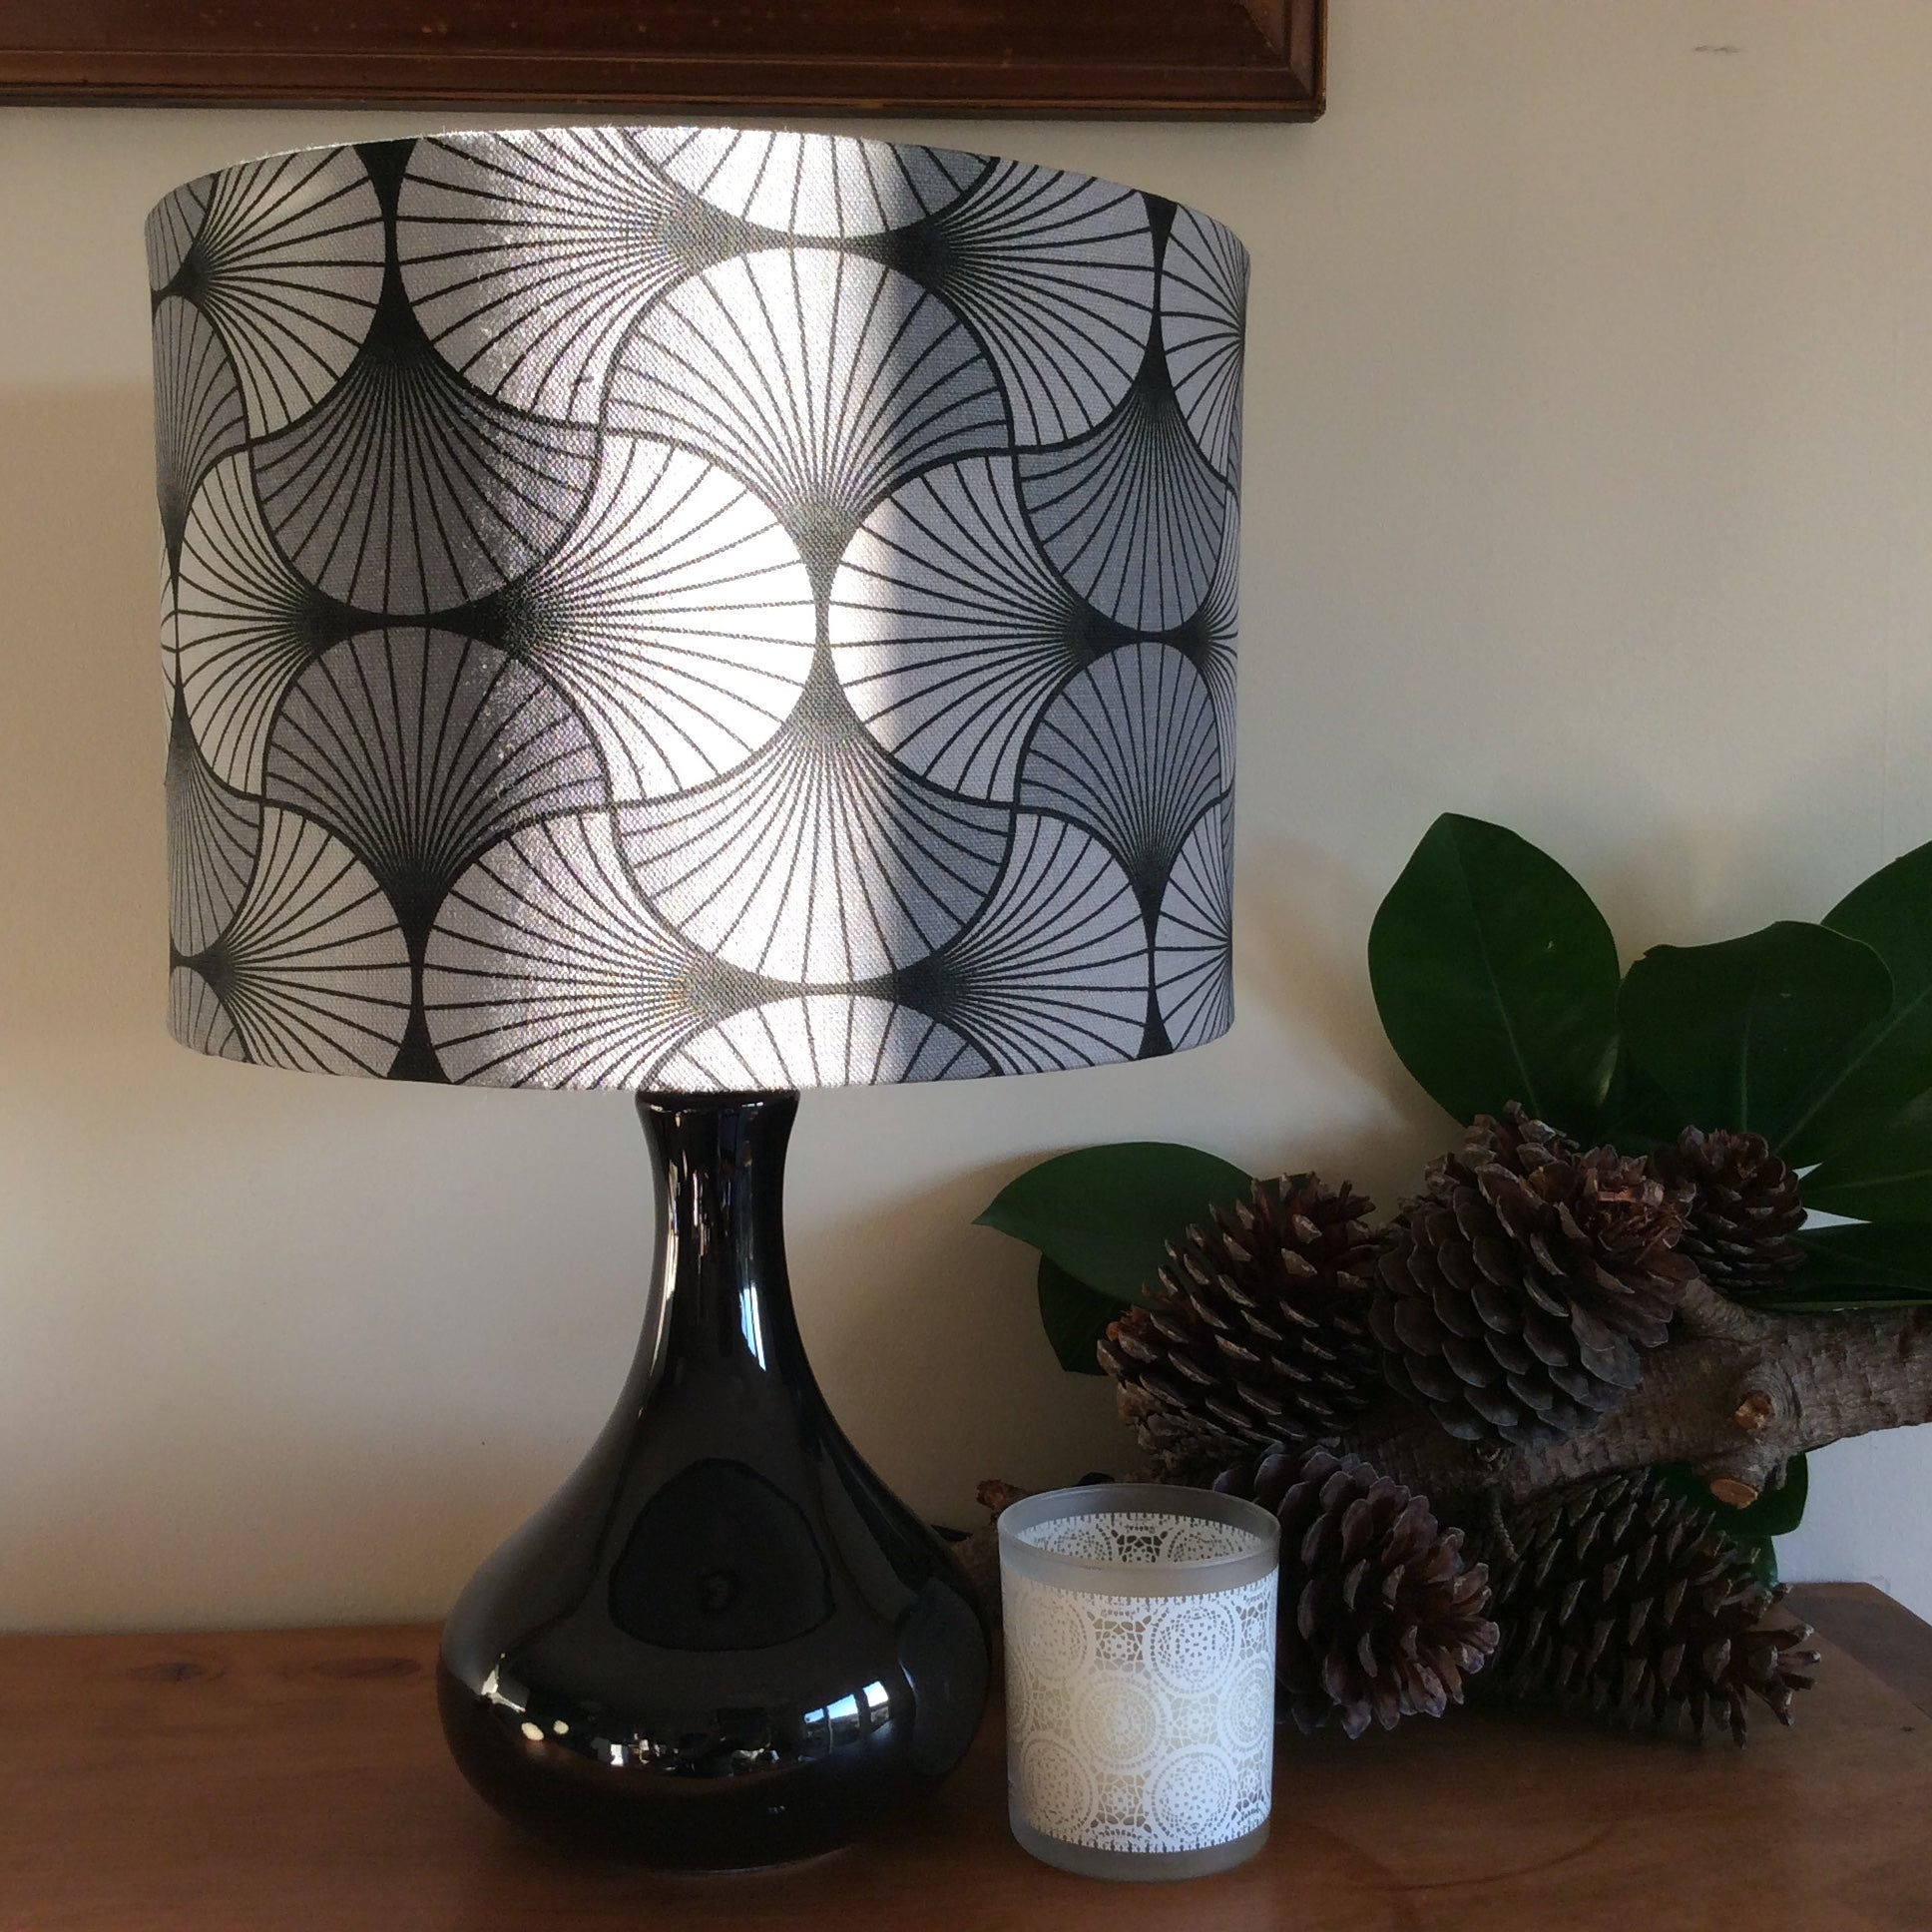 Shades at Grays Lampshades Small drum / Table lamp/floor stand / 29mm Grey geometric fabric lampshade handcrafted lighting made in new zealand